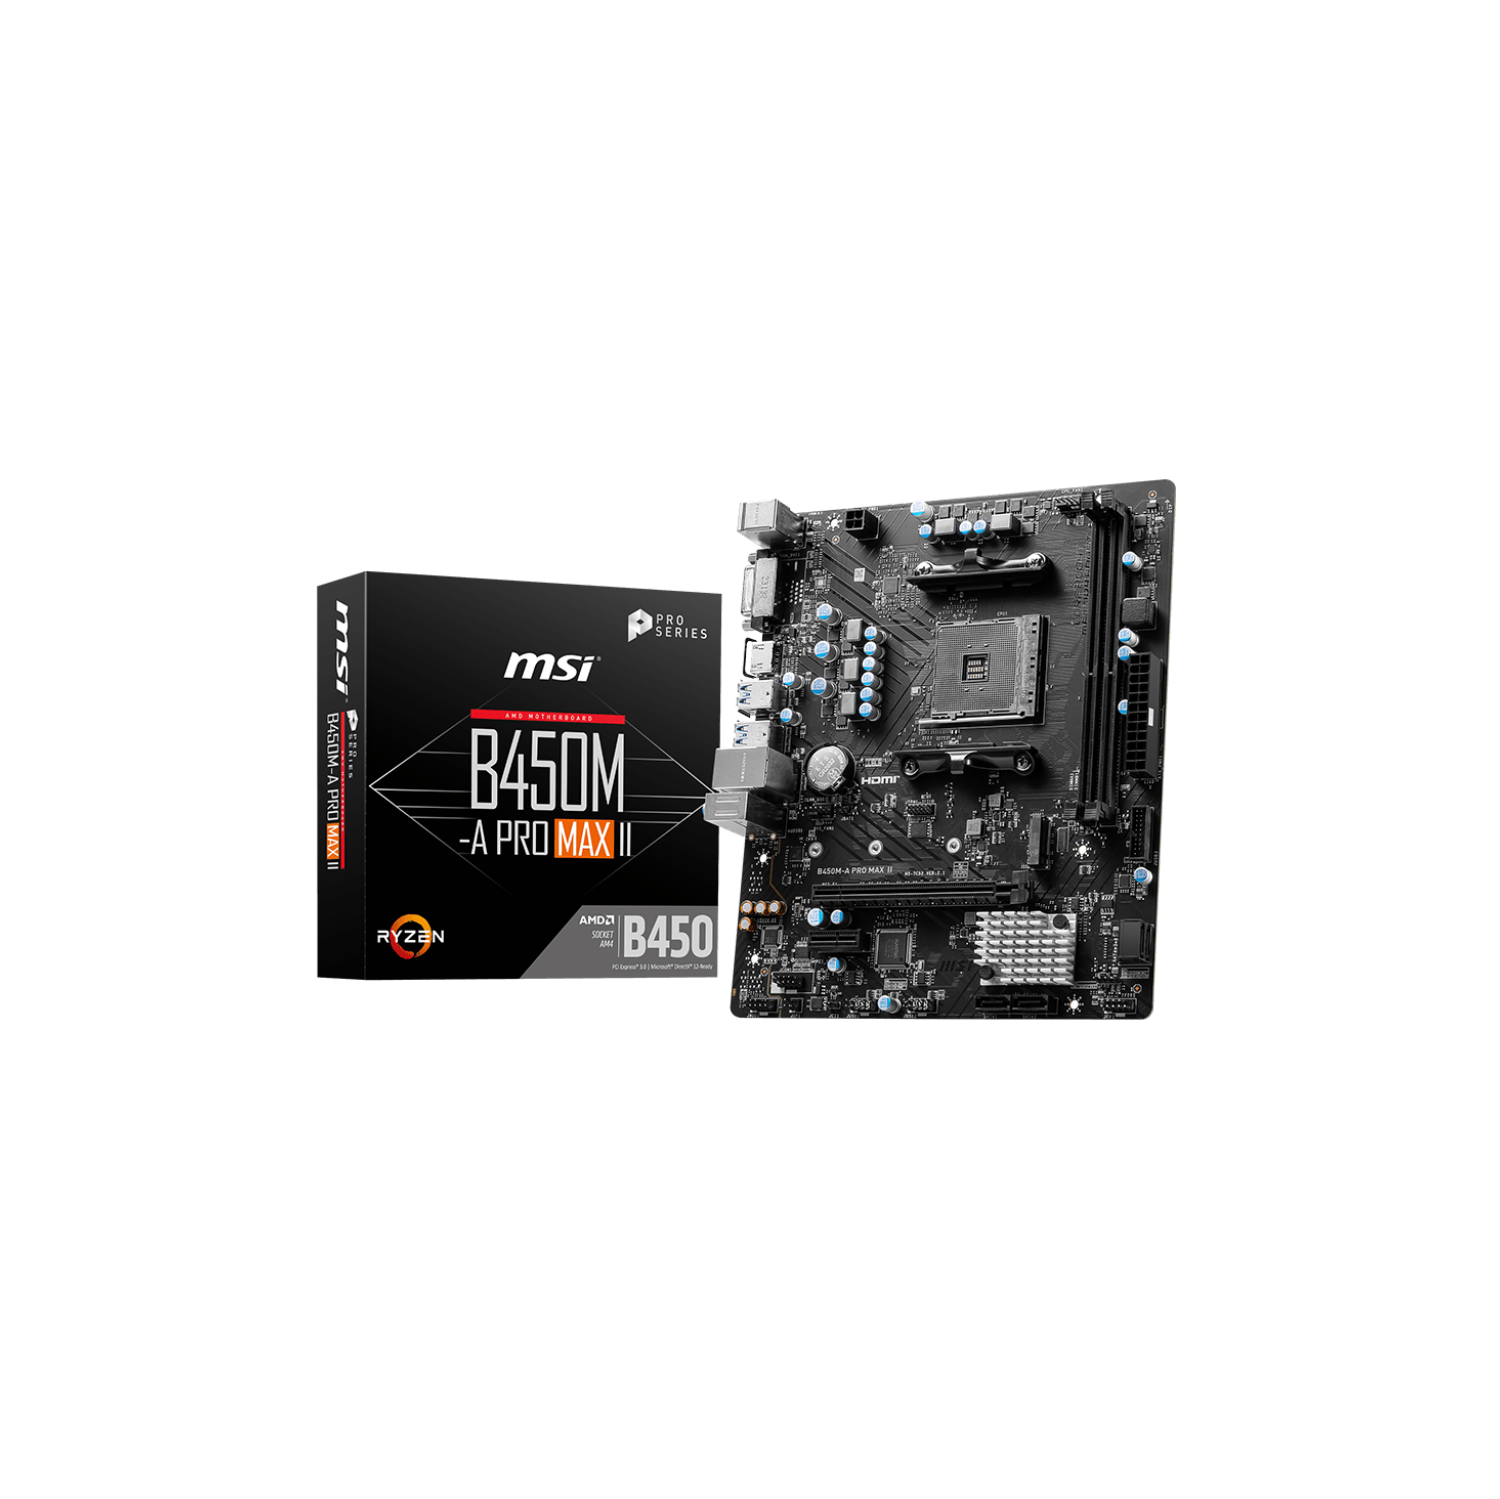 MSI B450M-A PRO MAX II Motherboard (Supports 1st, 2nd and 3rd Gen AMD Ryzen CPU, AM4, DDR4, PCIe 3.0, M.2, mATX)